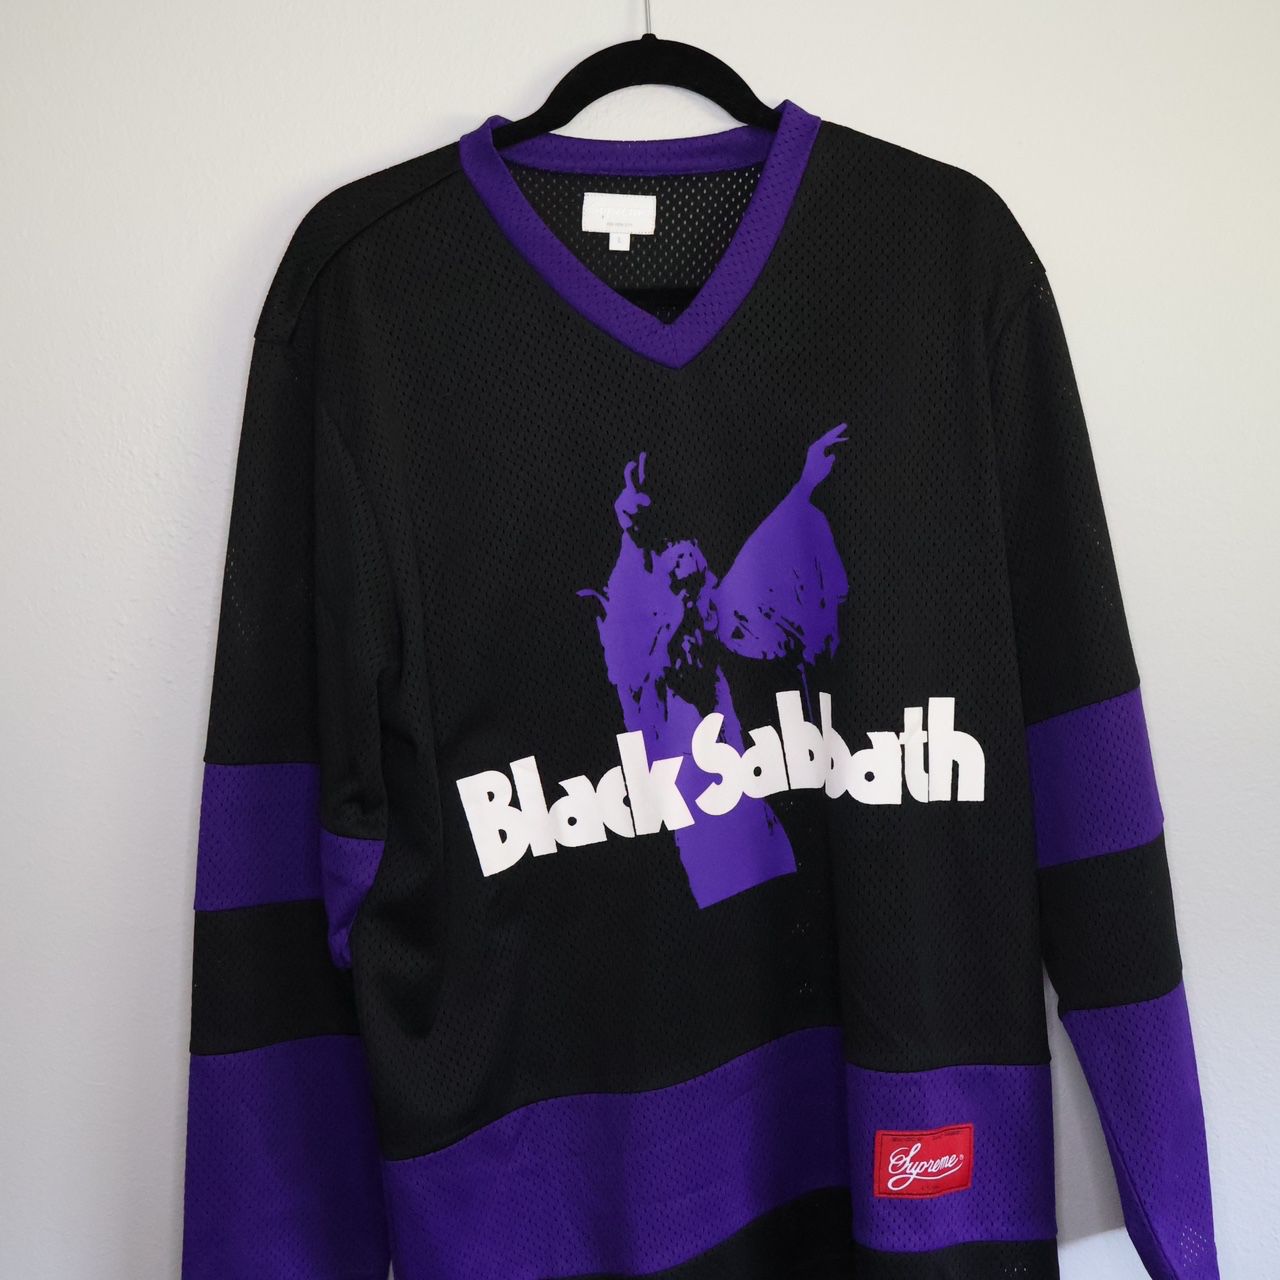 Bodega Hockey Jersey for Sale in Los Angeles, CA - OfferUp